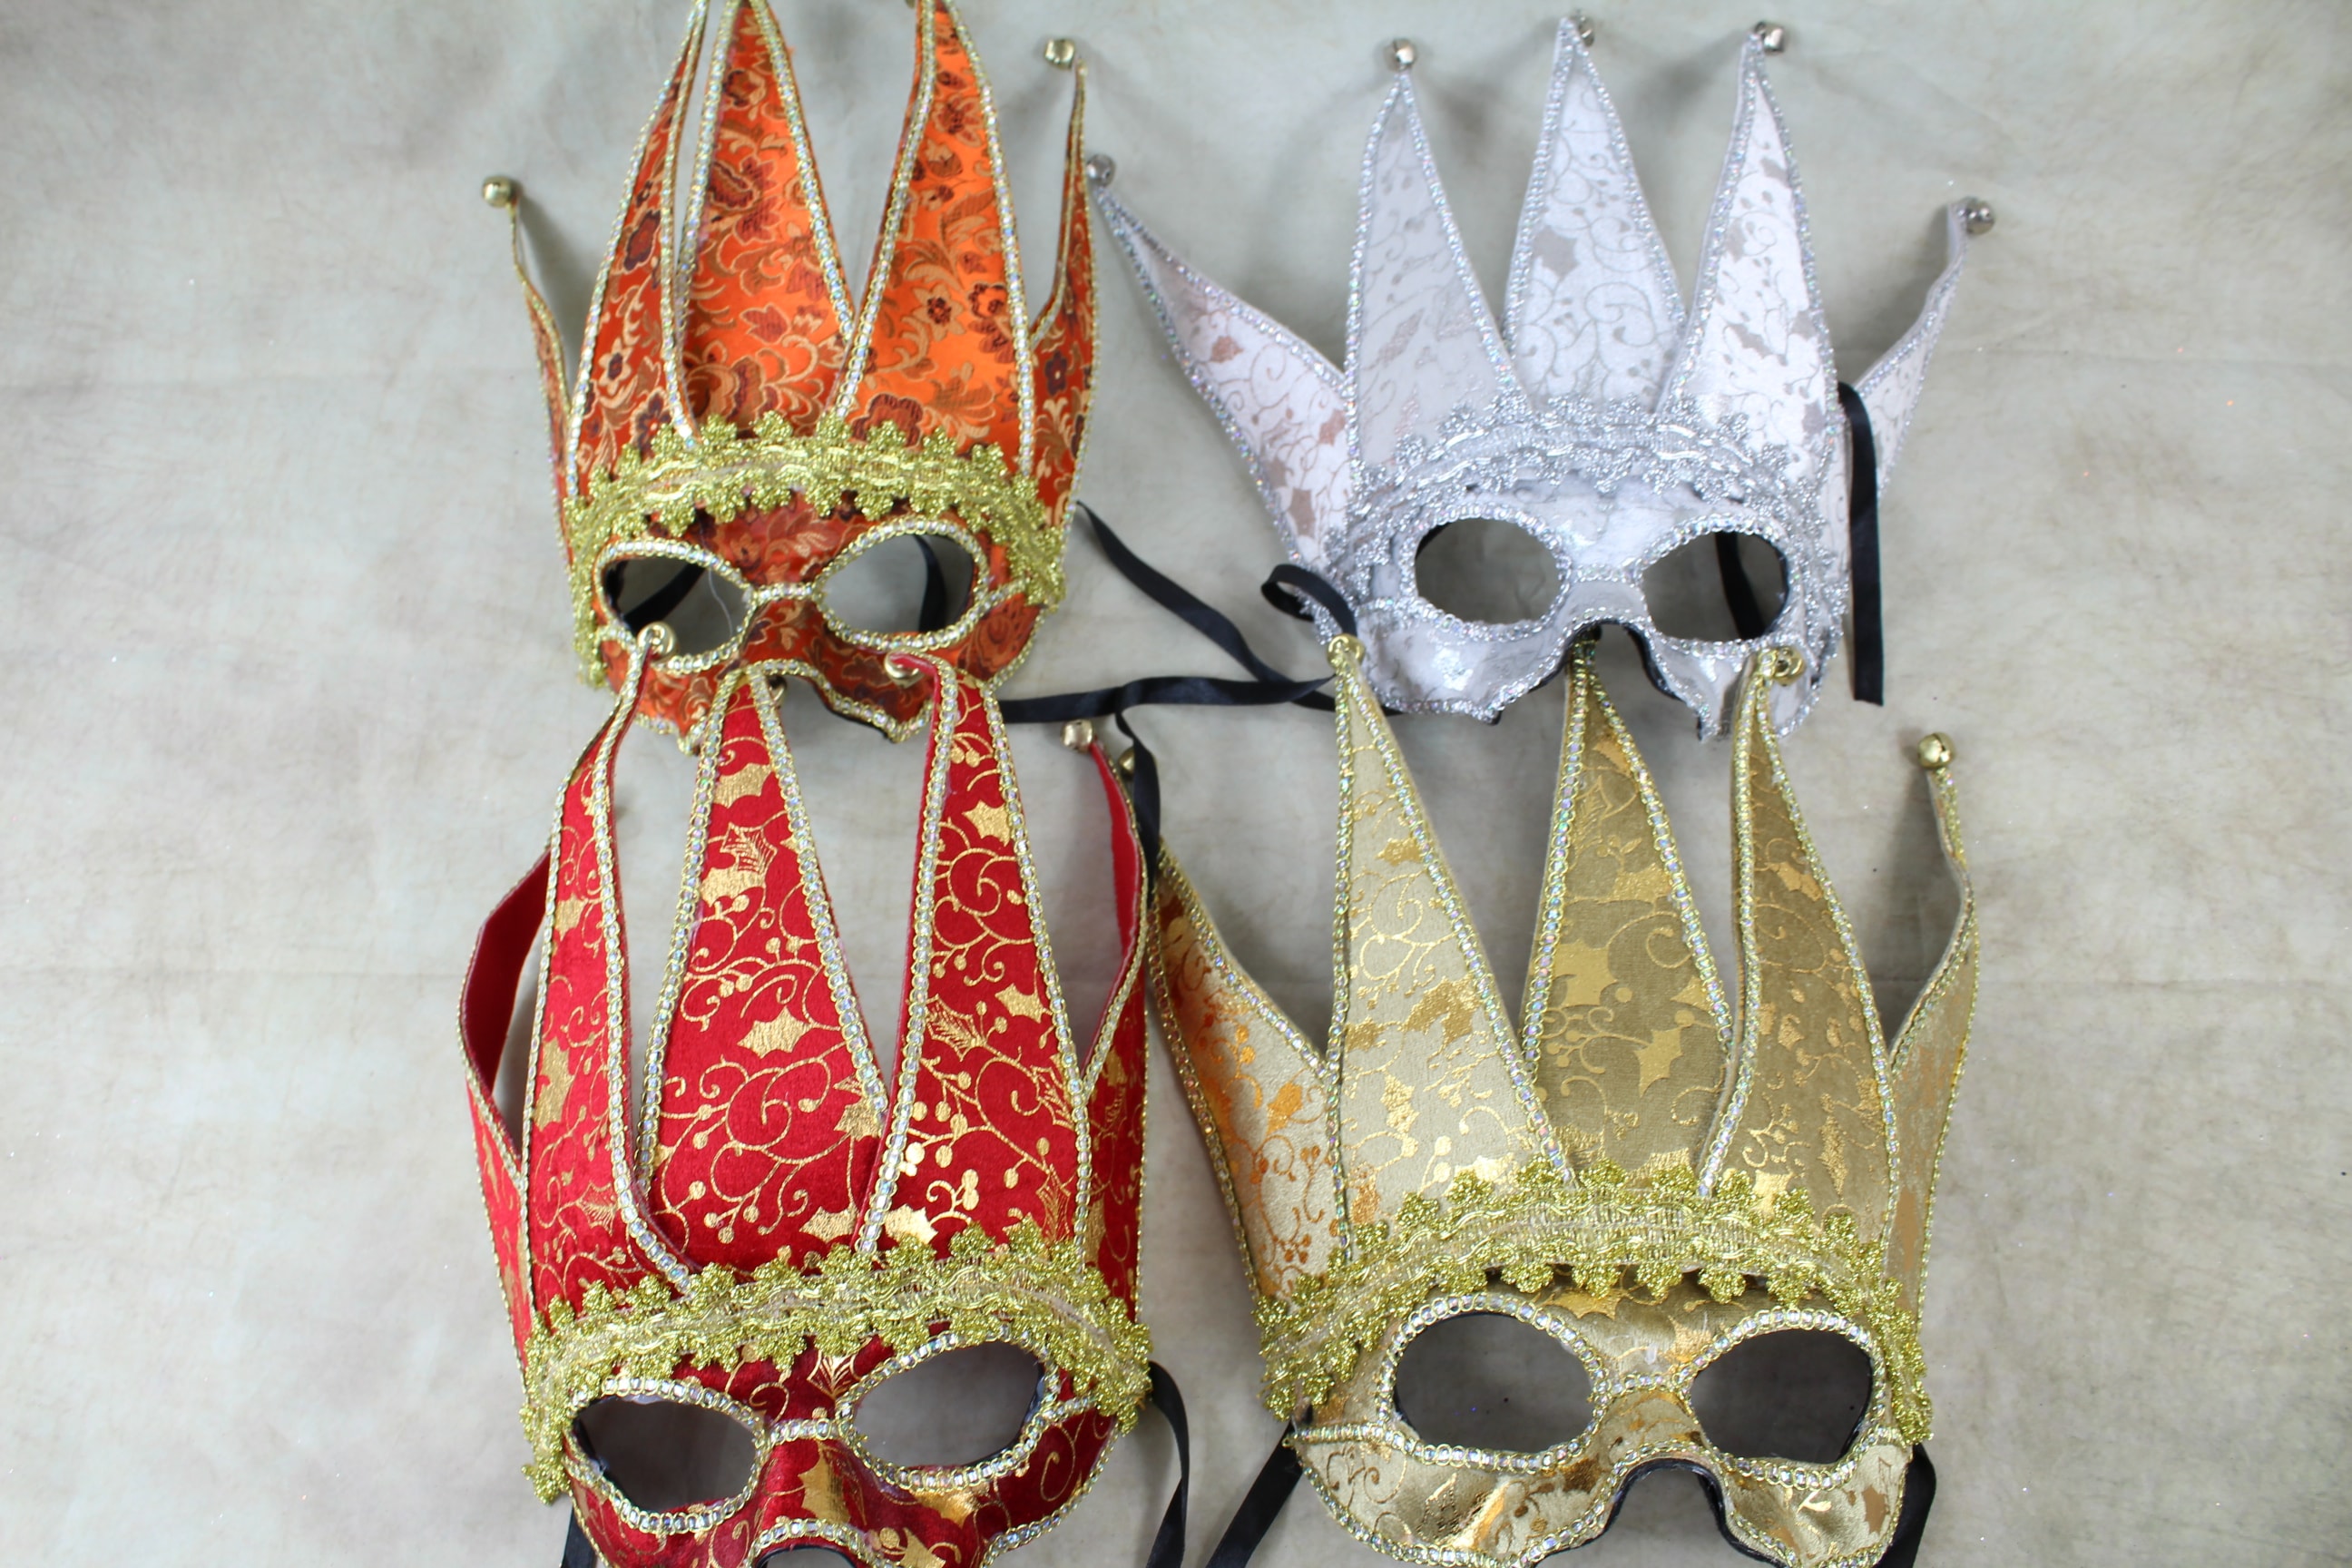 3 x Christmas Print Jester Masks - BUY 3 FOR THE PRICE OF 2!